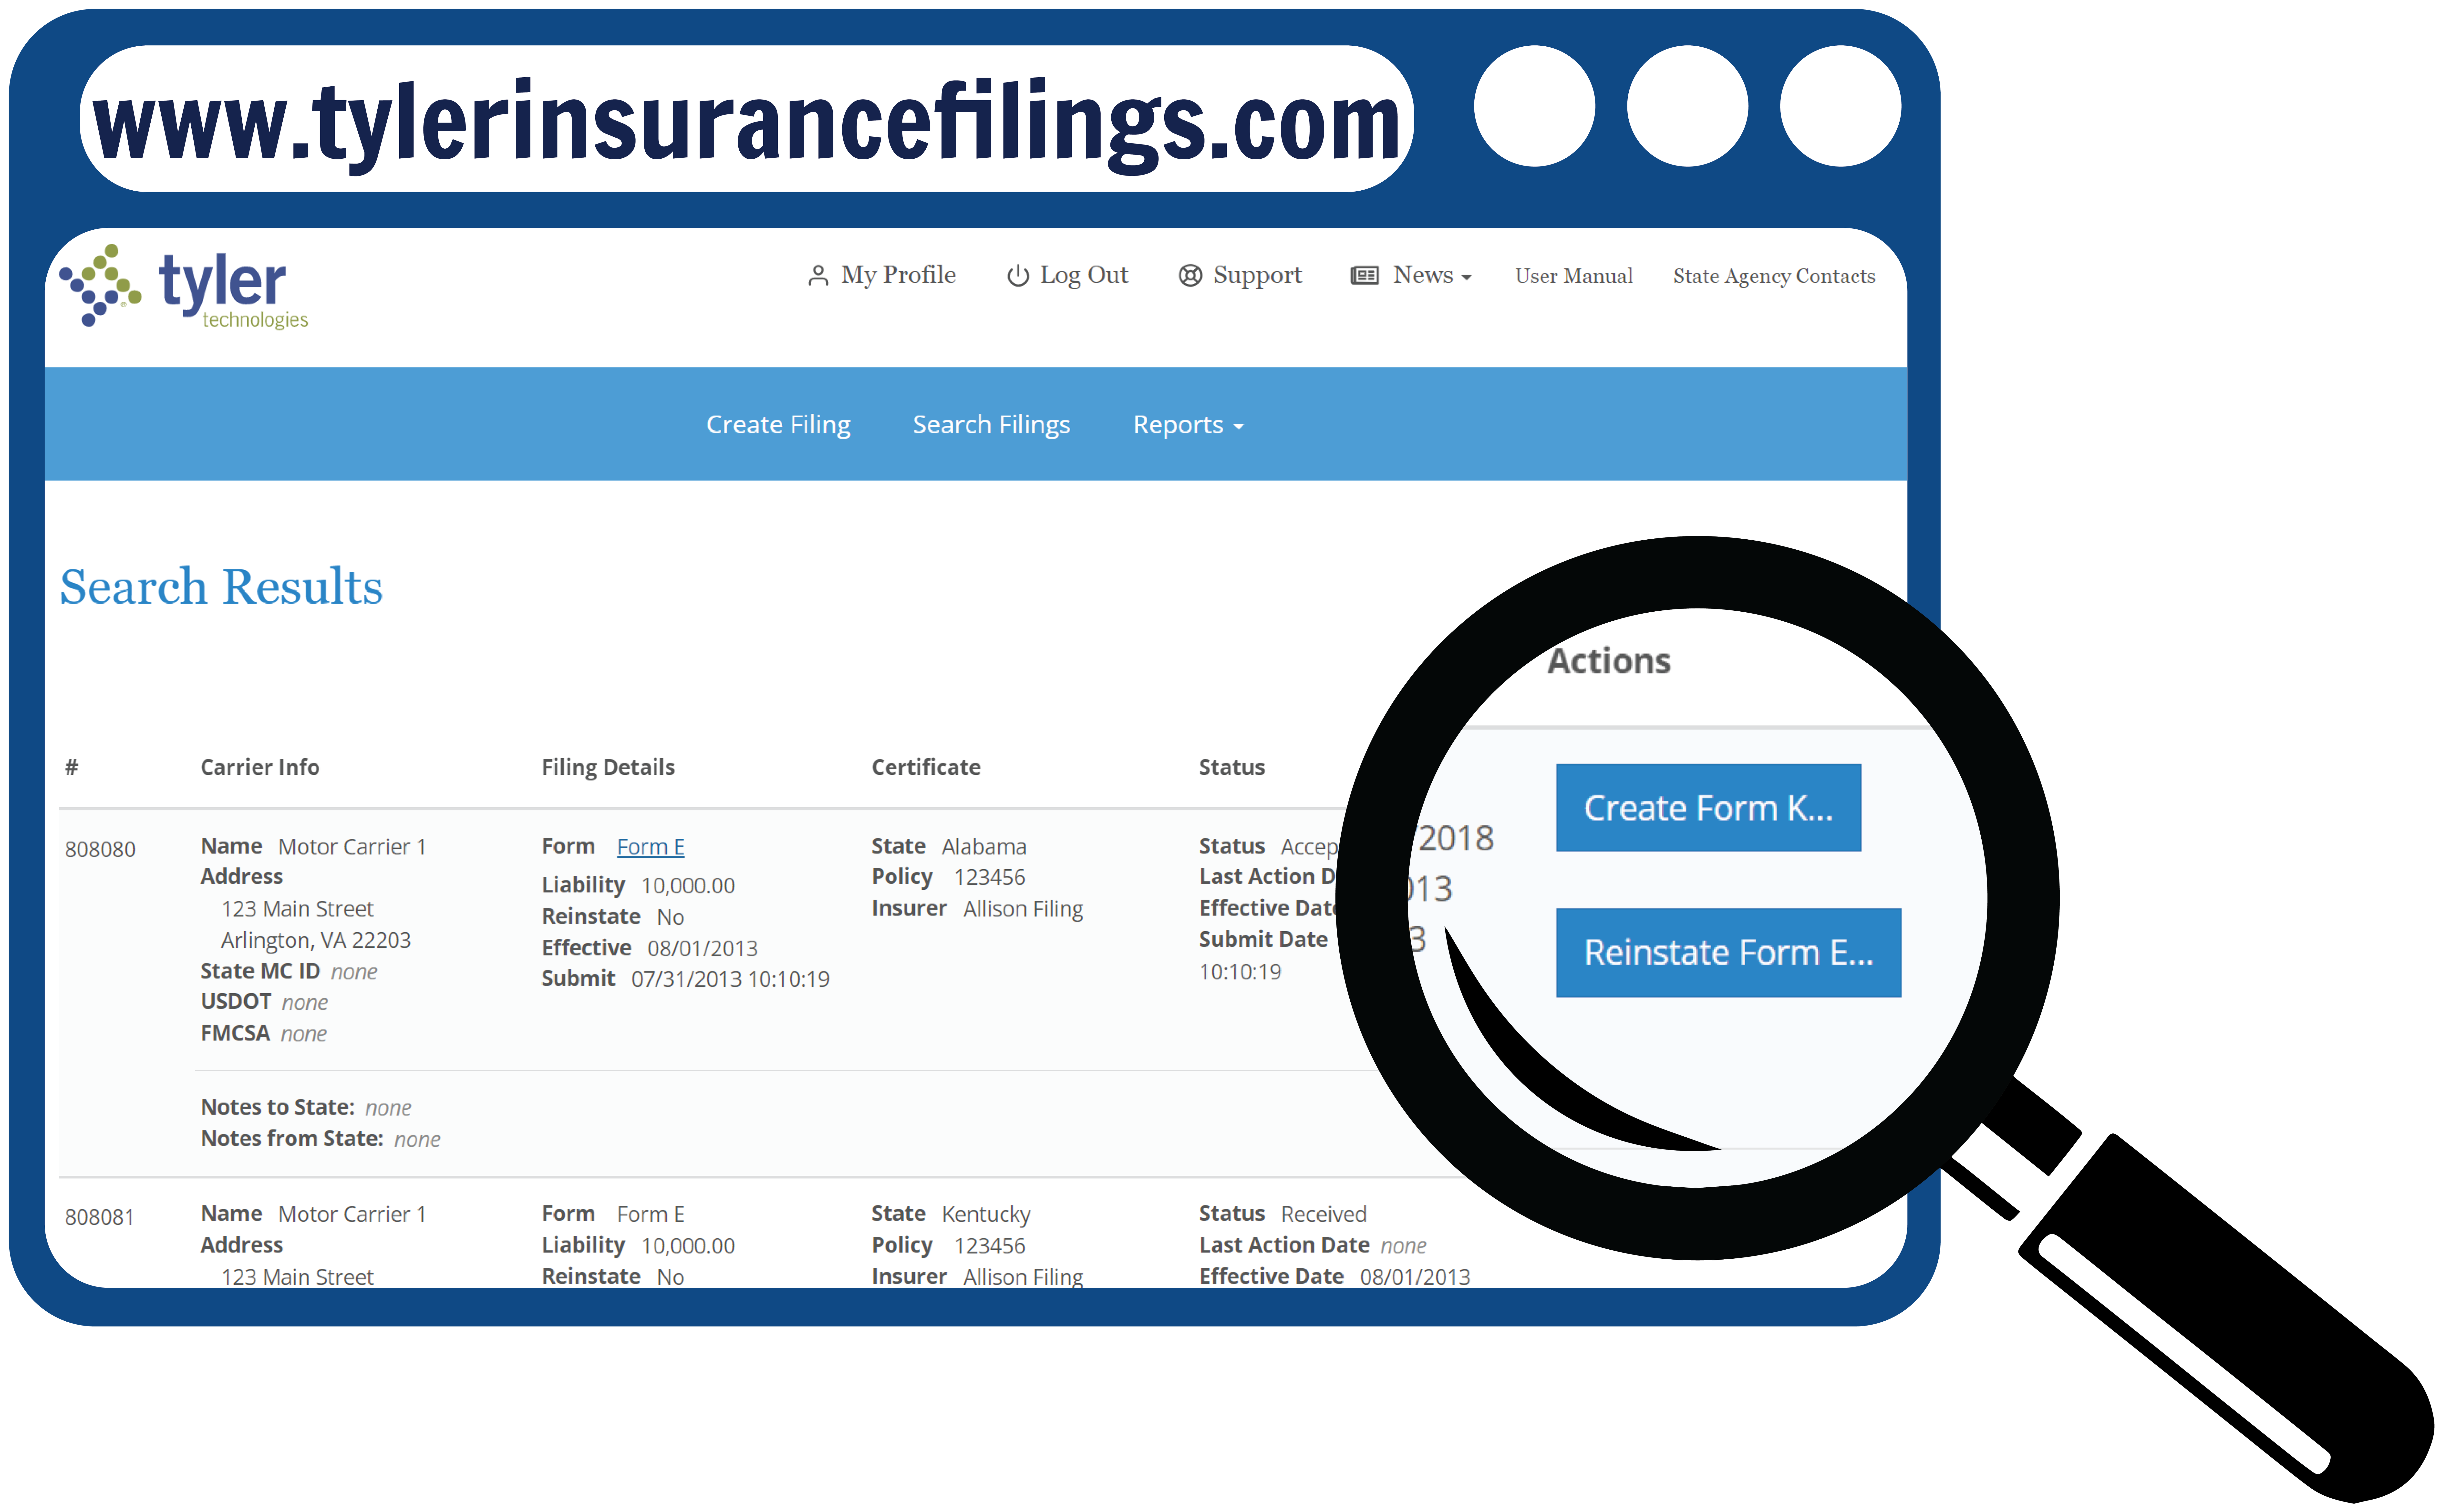 Many proof-of-insurance filings and cancellations can be generated with a single click, reducing manual entry and data errors.